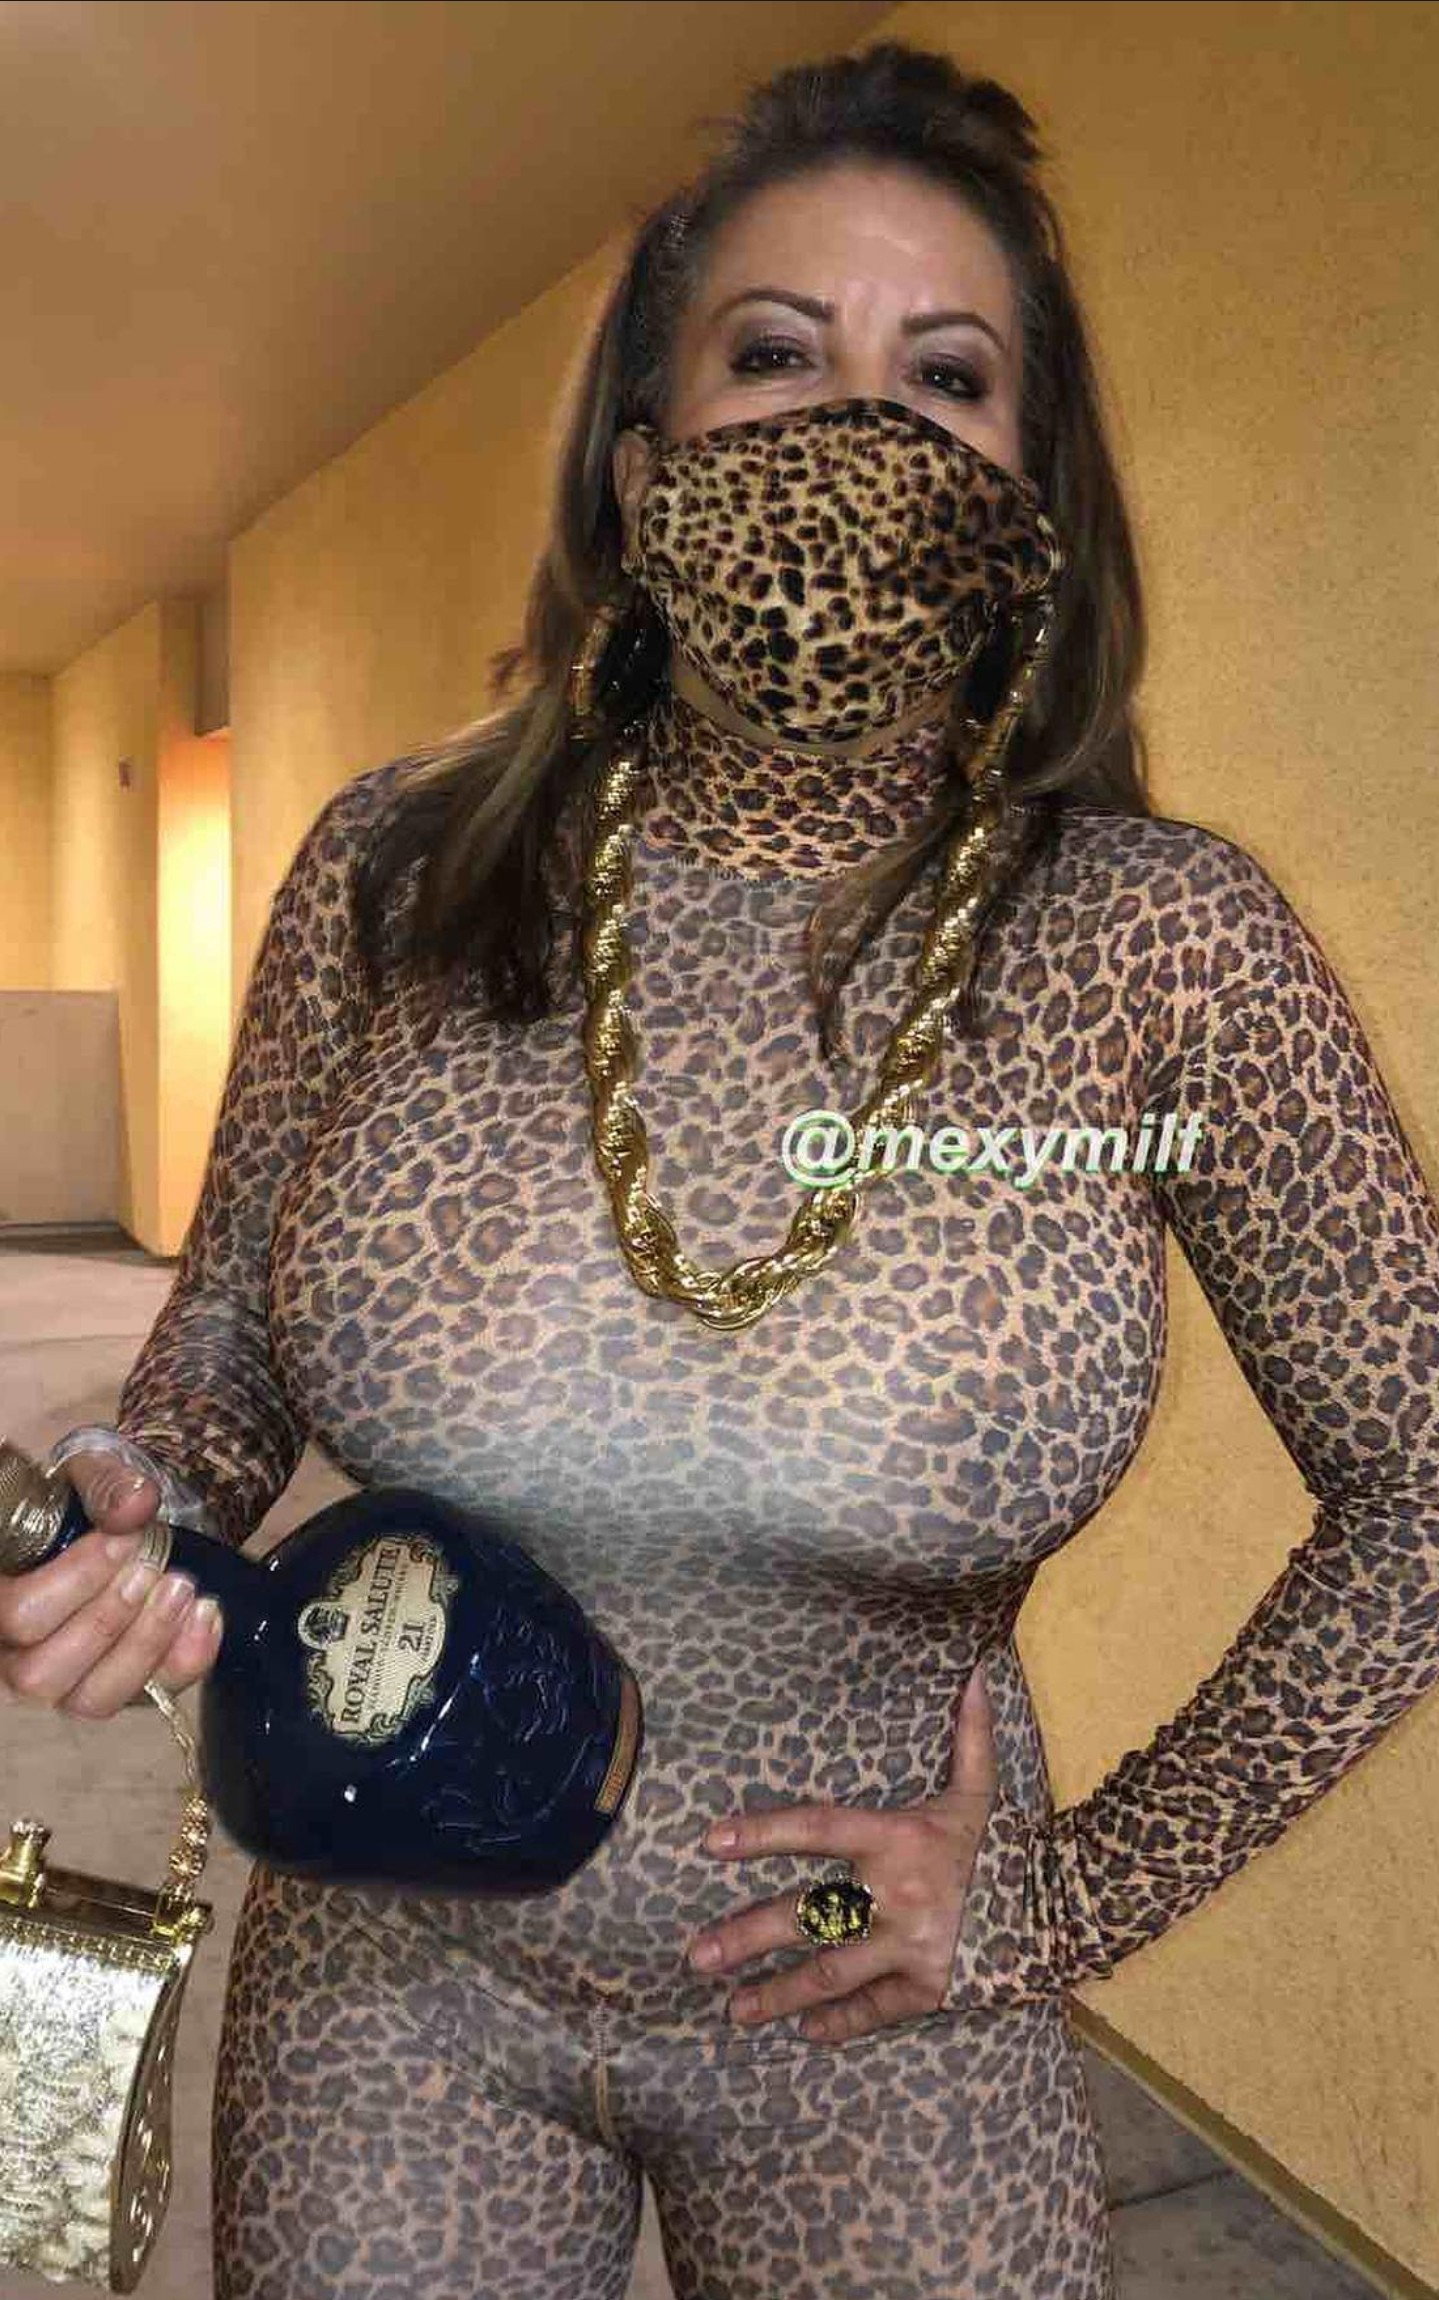 Watch the Photo by hateispride299442 with the username @hateispride299442, posted on November 28, 2020. The post is about the topic Aunt/nephew. and the text says 'found this gem @mexymilf no disrespect to her sensual vibes'